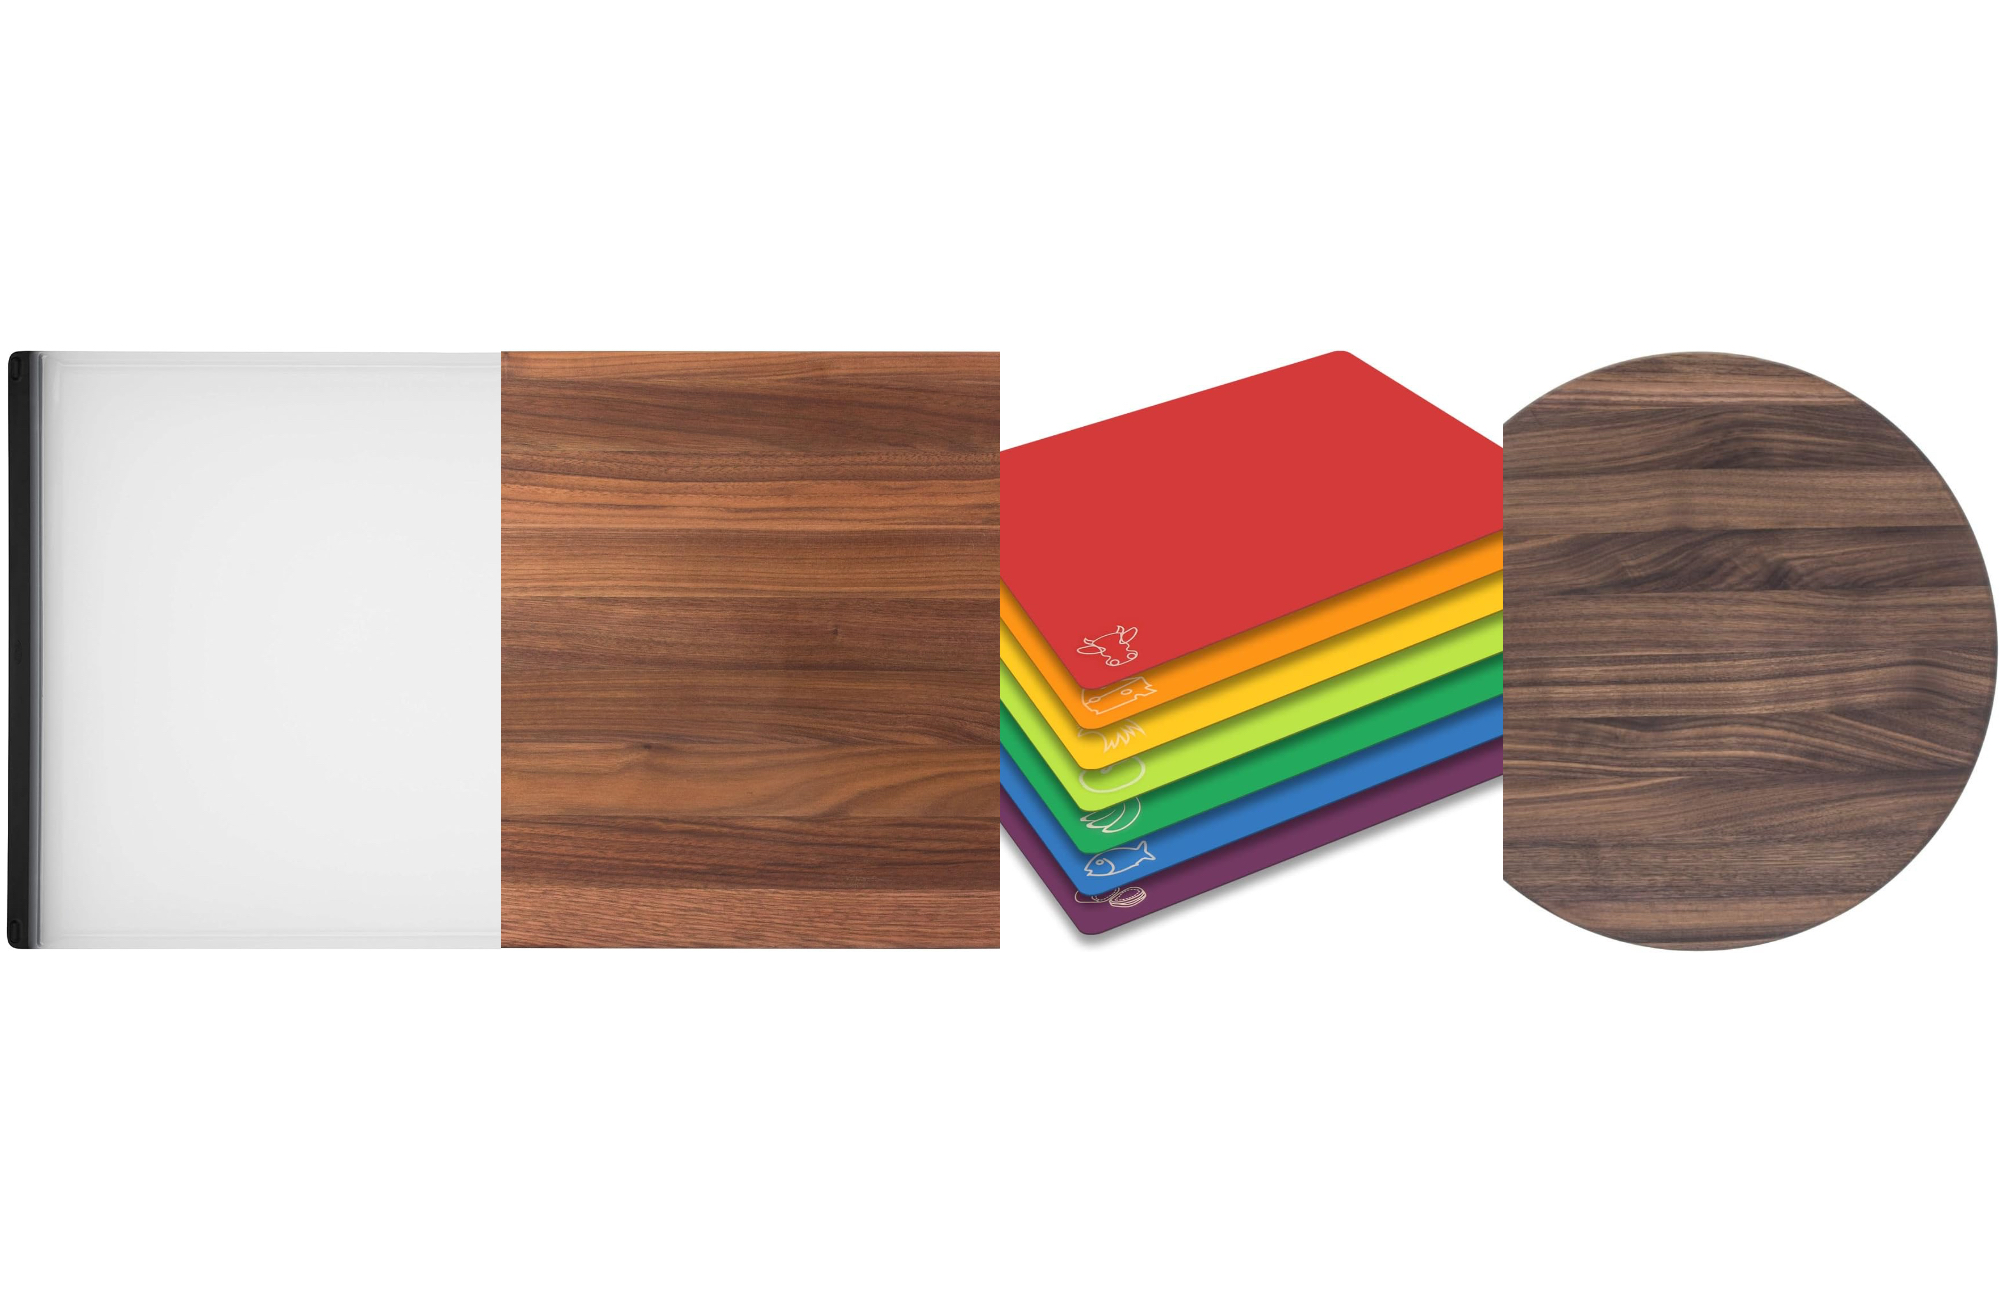 This Multicolored Plastic Cutting Board Doubles as a Serving Platter